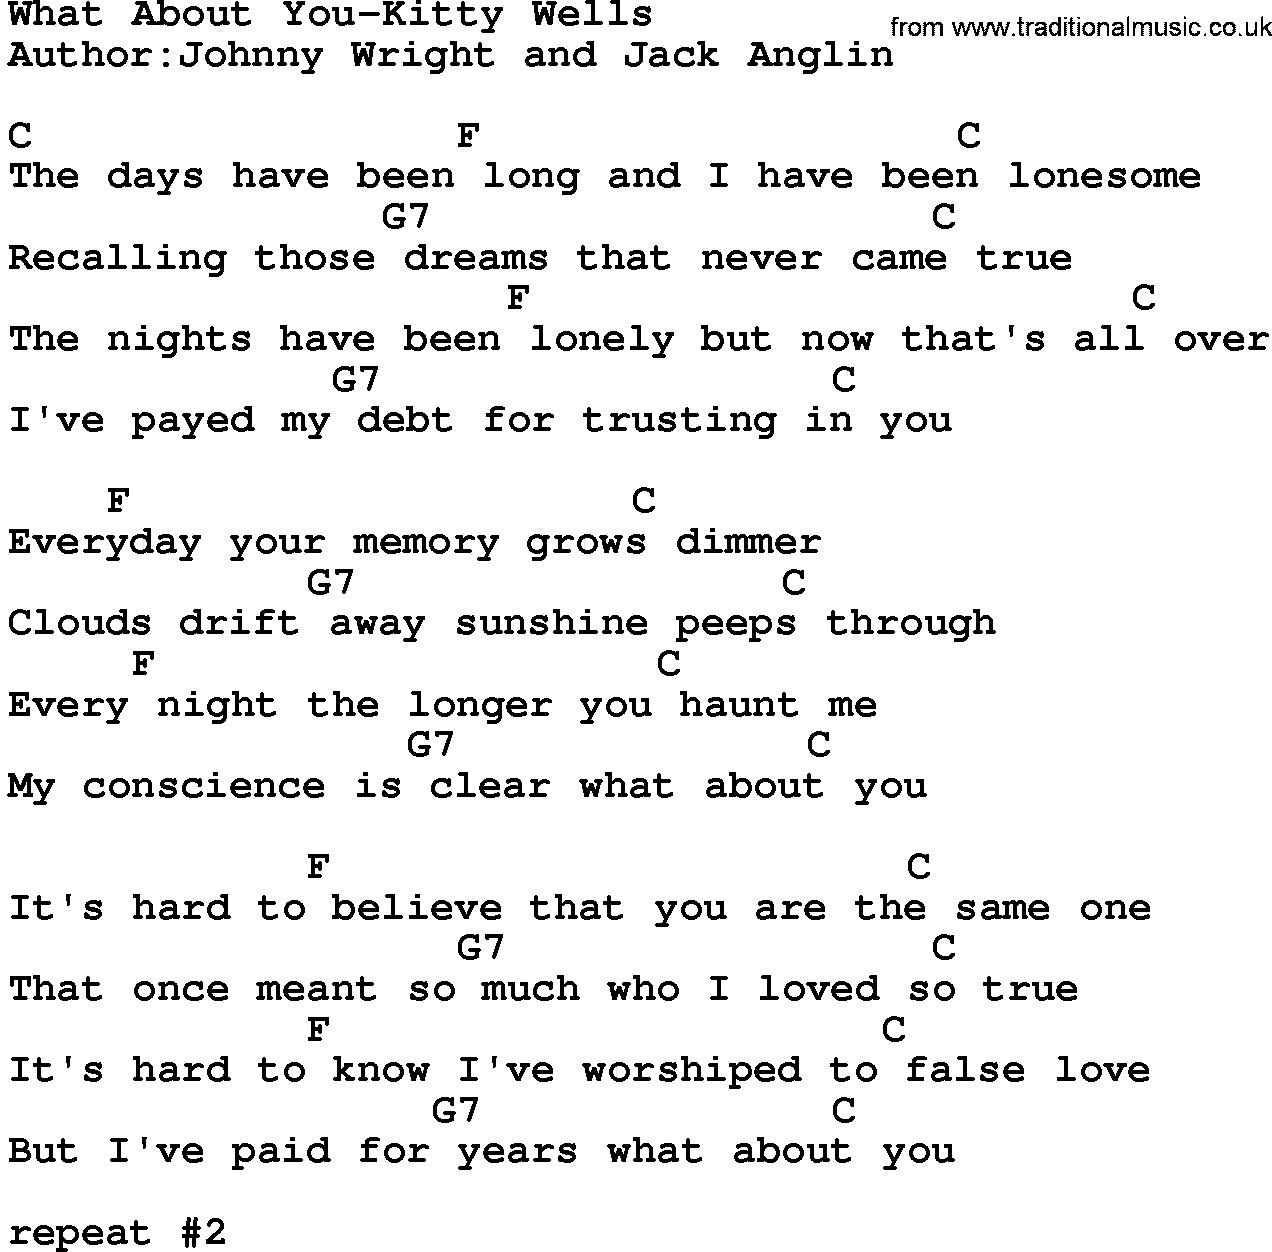 Country music song: What About You-Kitty Wells lyrics and chords